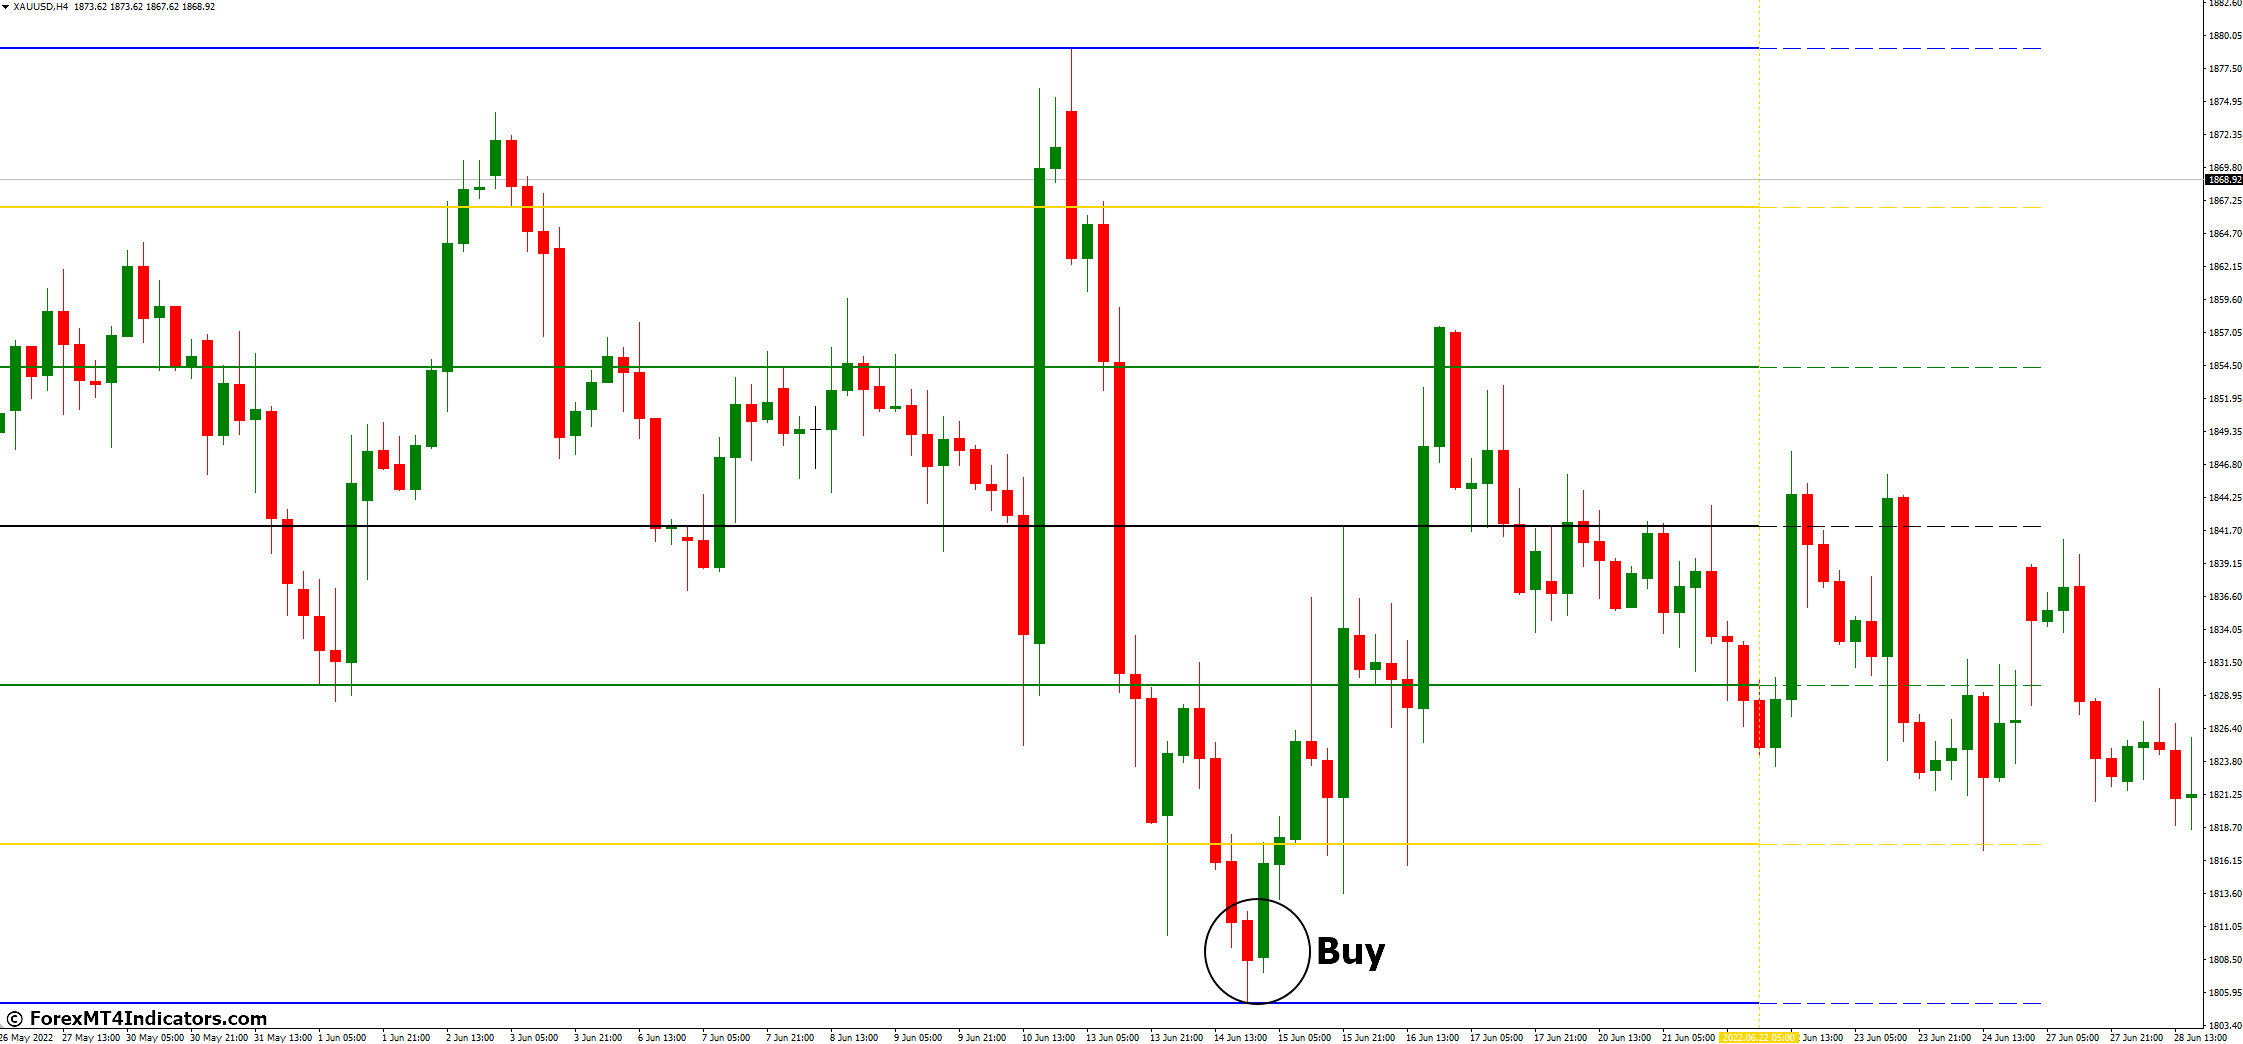 How to Trade with Support and Resistance Zone MT4 Indicator - Buy Entry